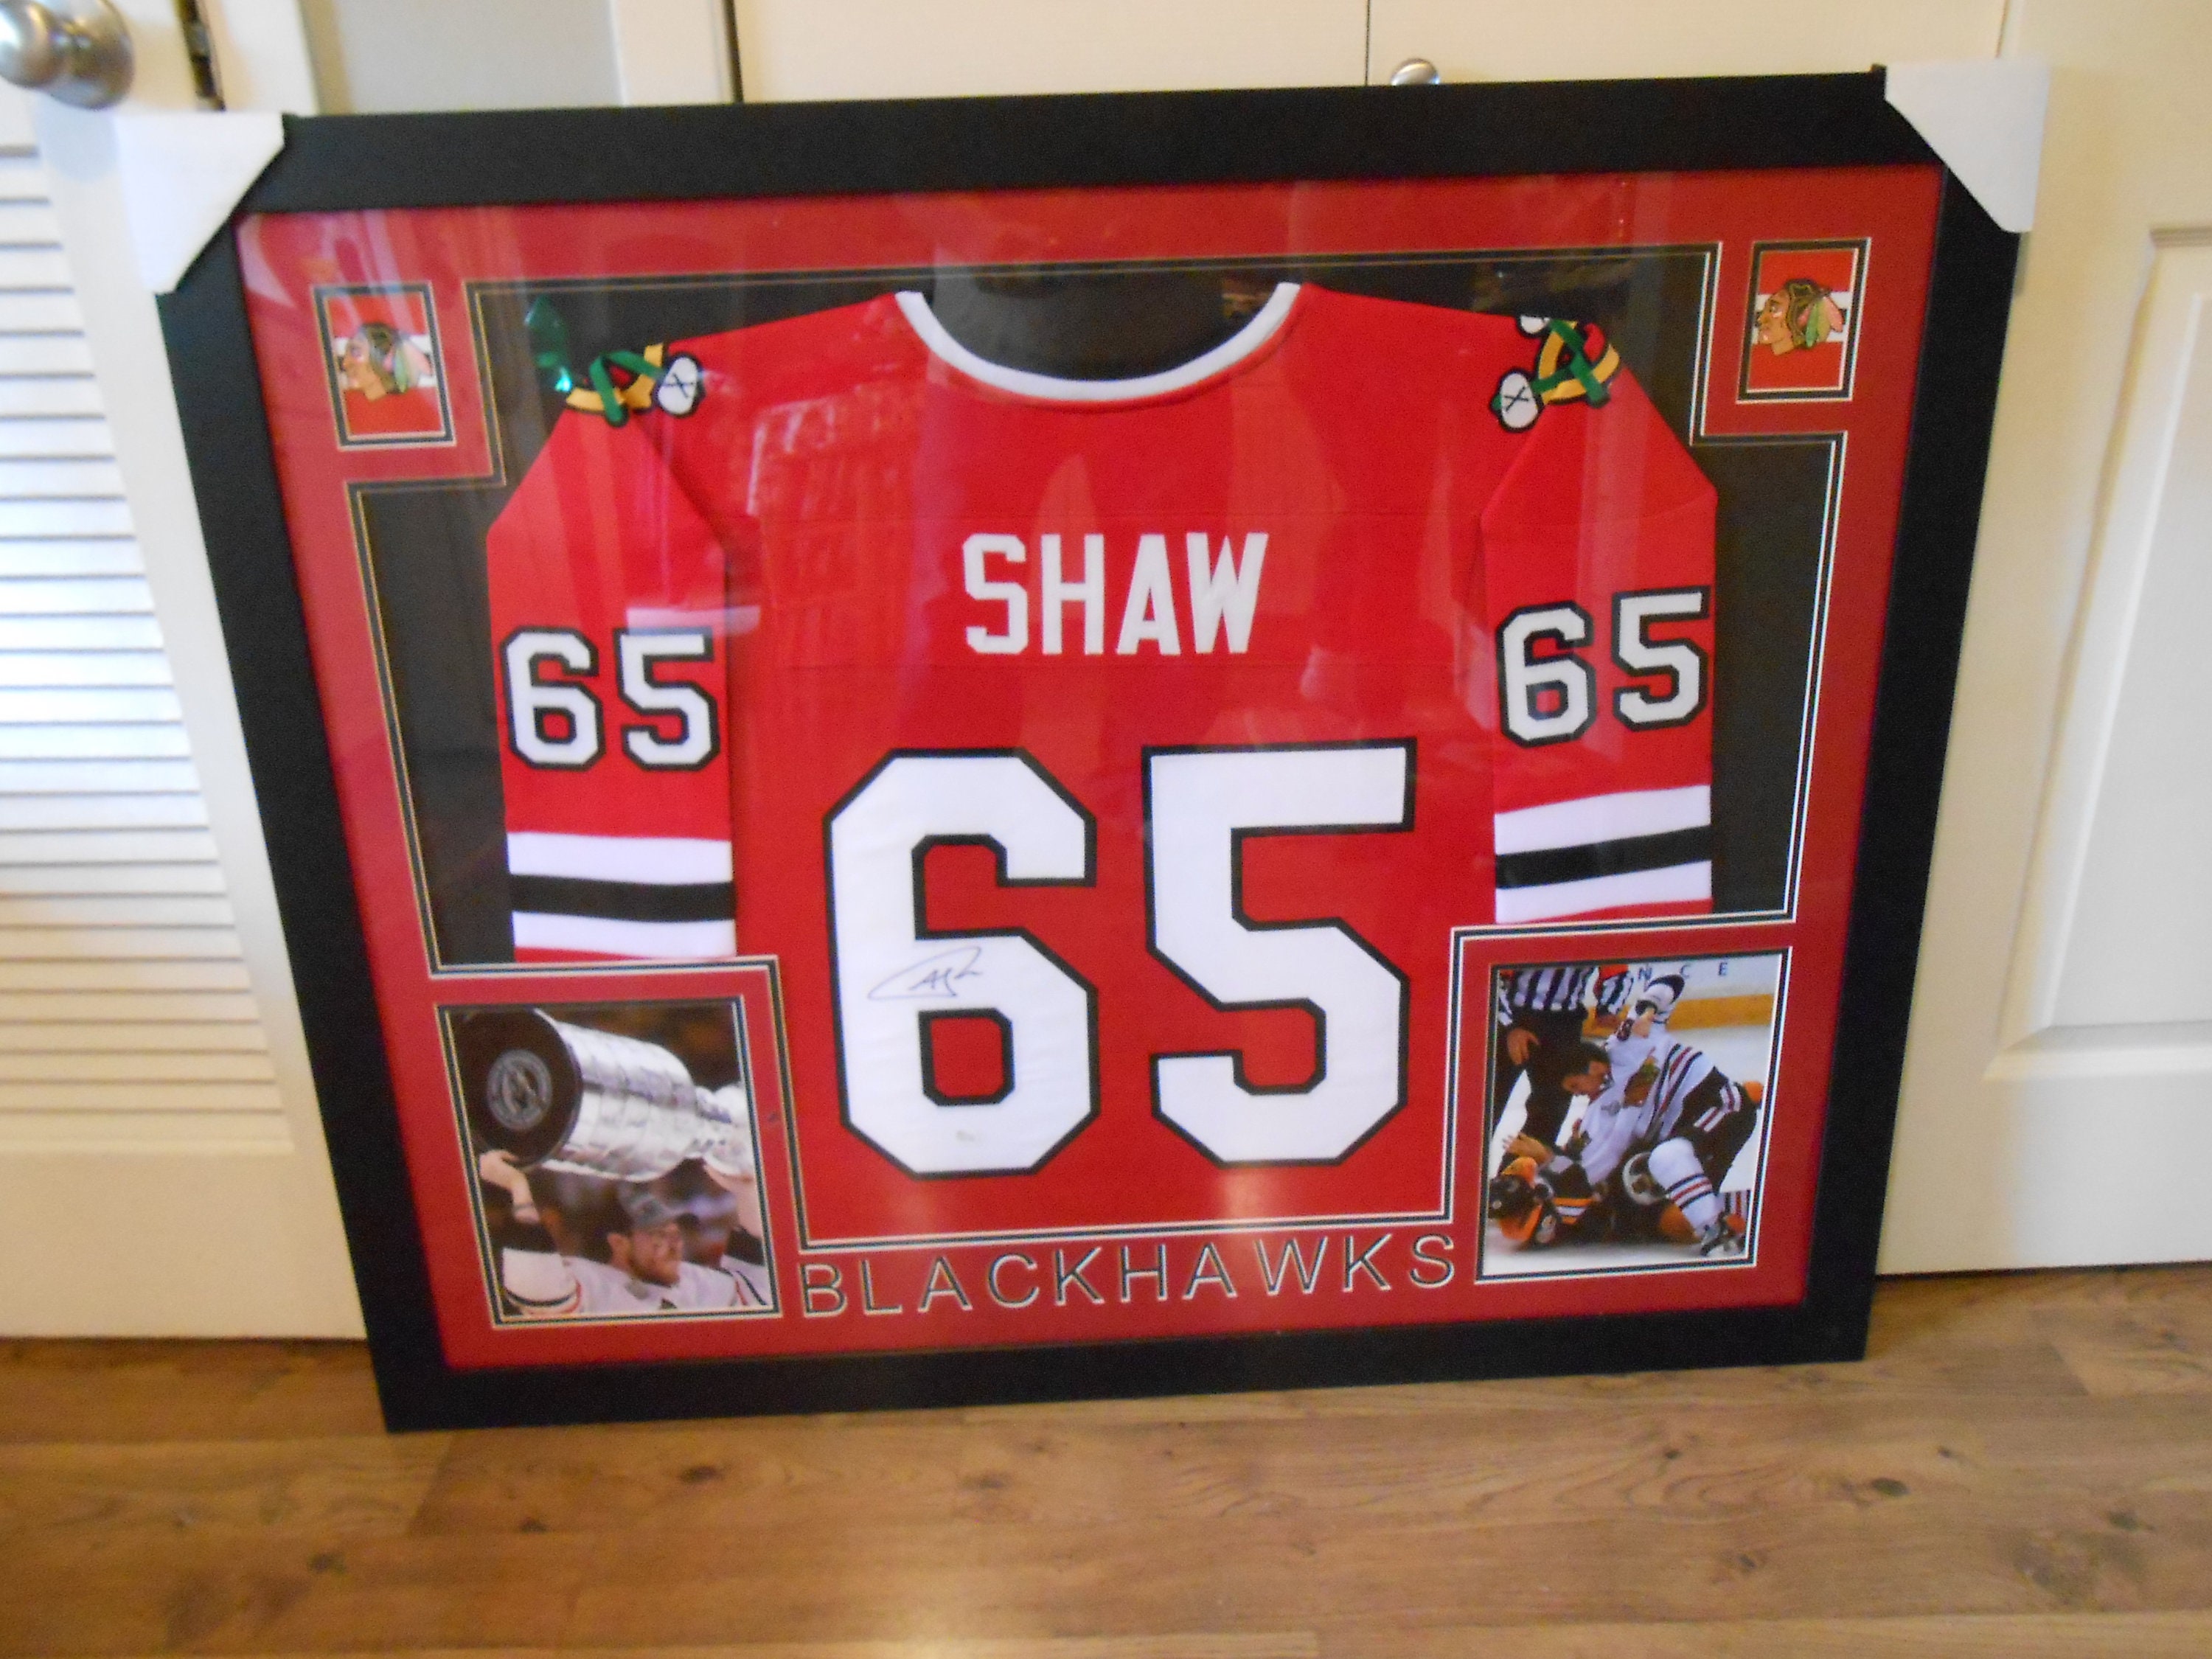 andrew shaw signed jersey